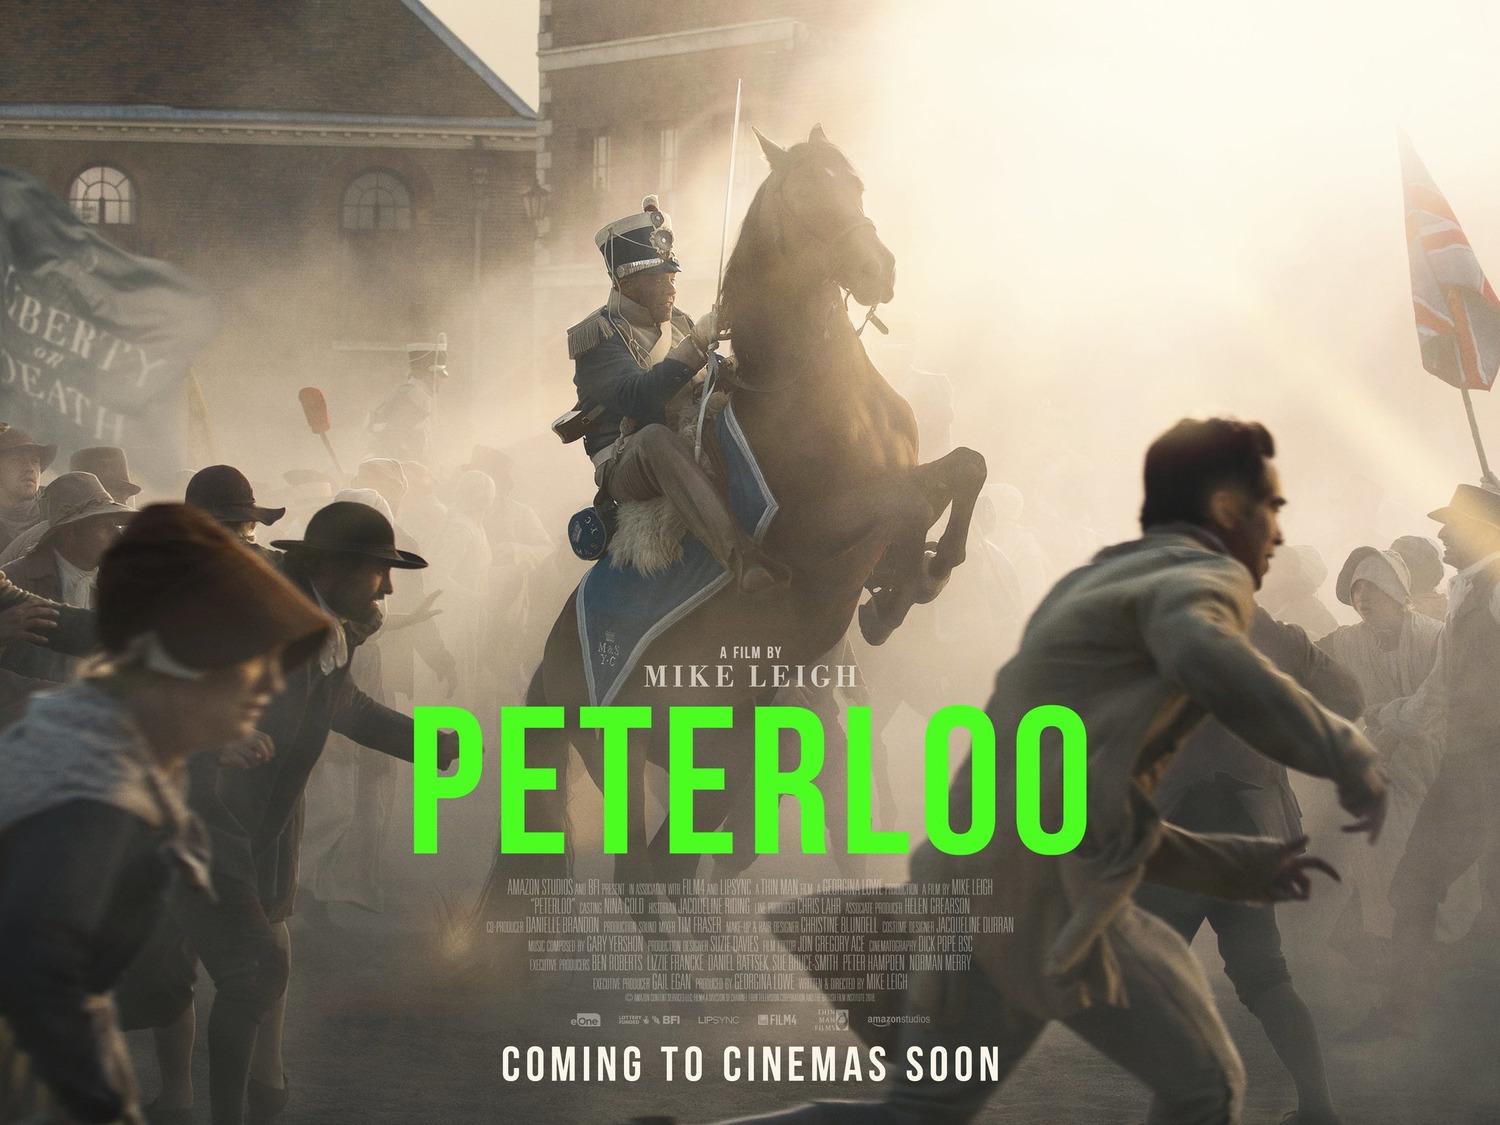 Extra Large Movie Poster Image for Peterloo (#2 of 2)